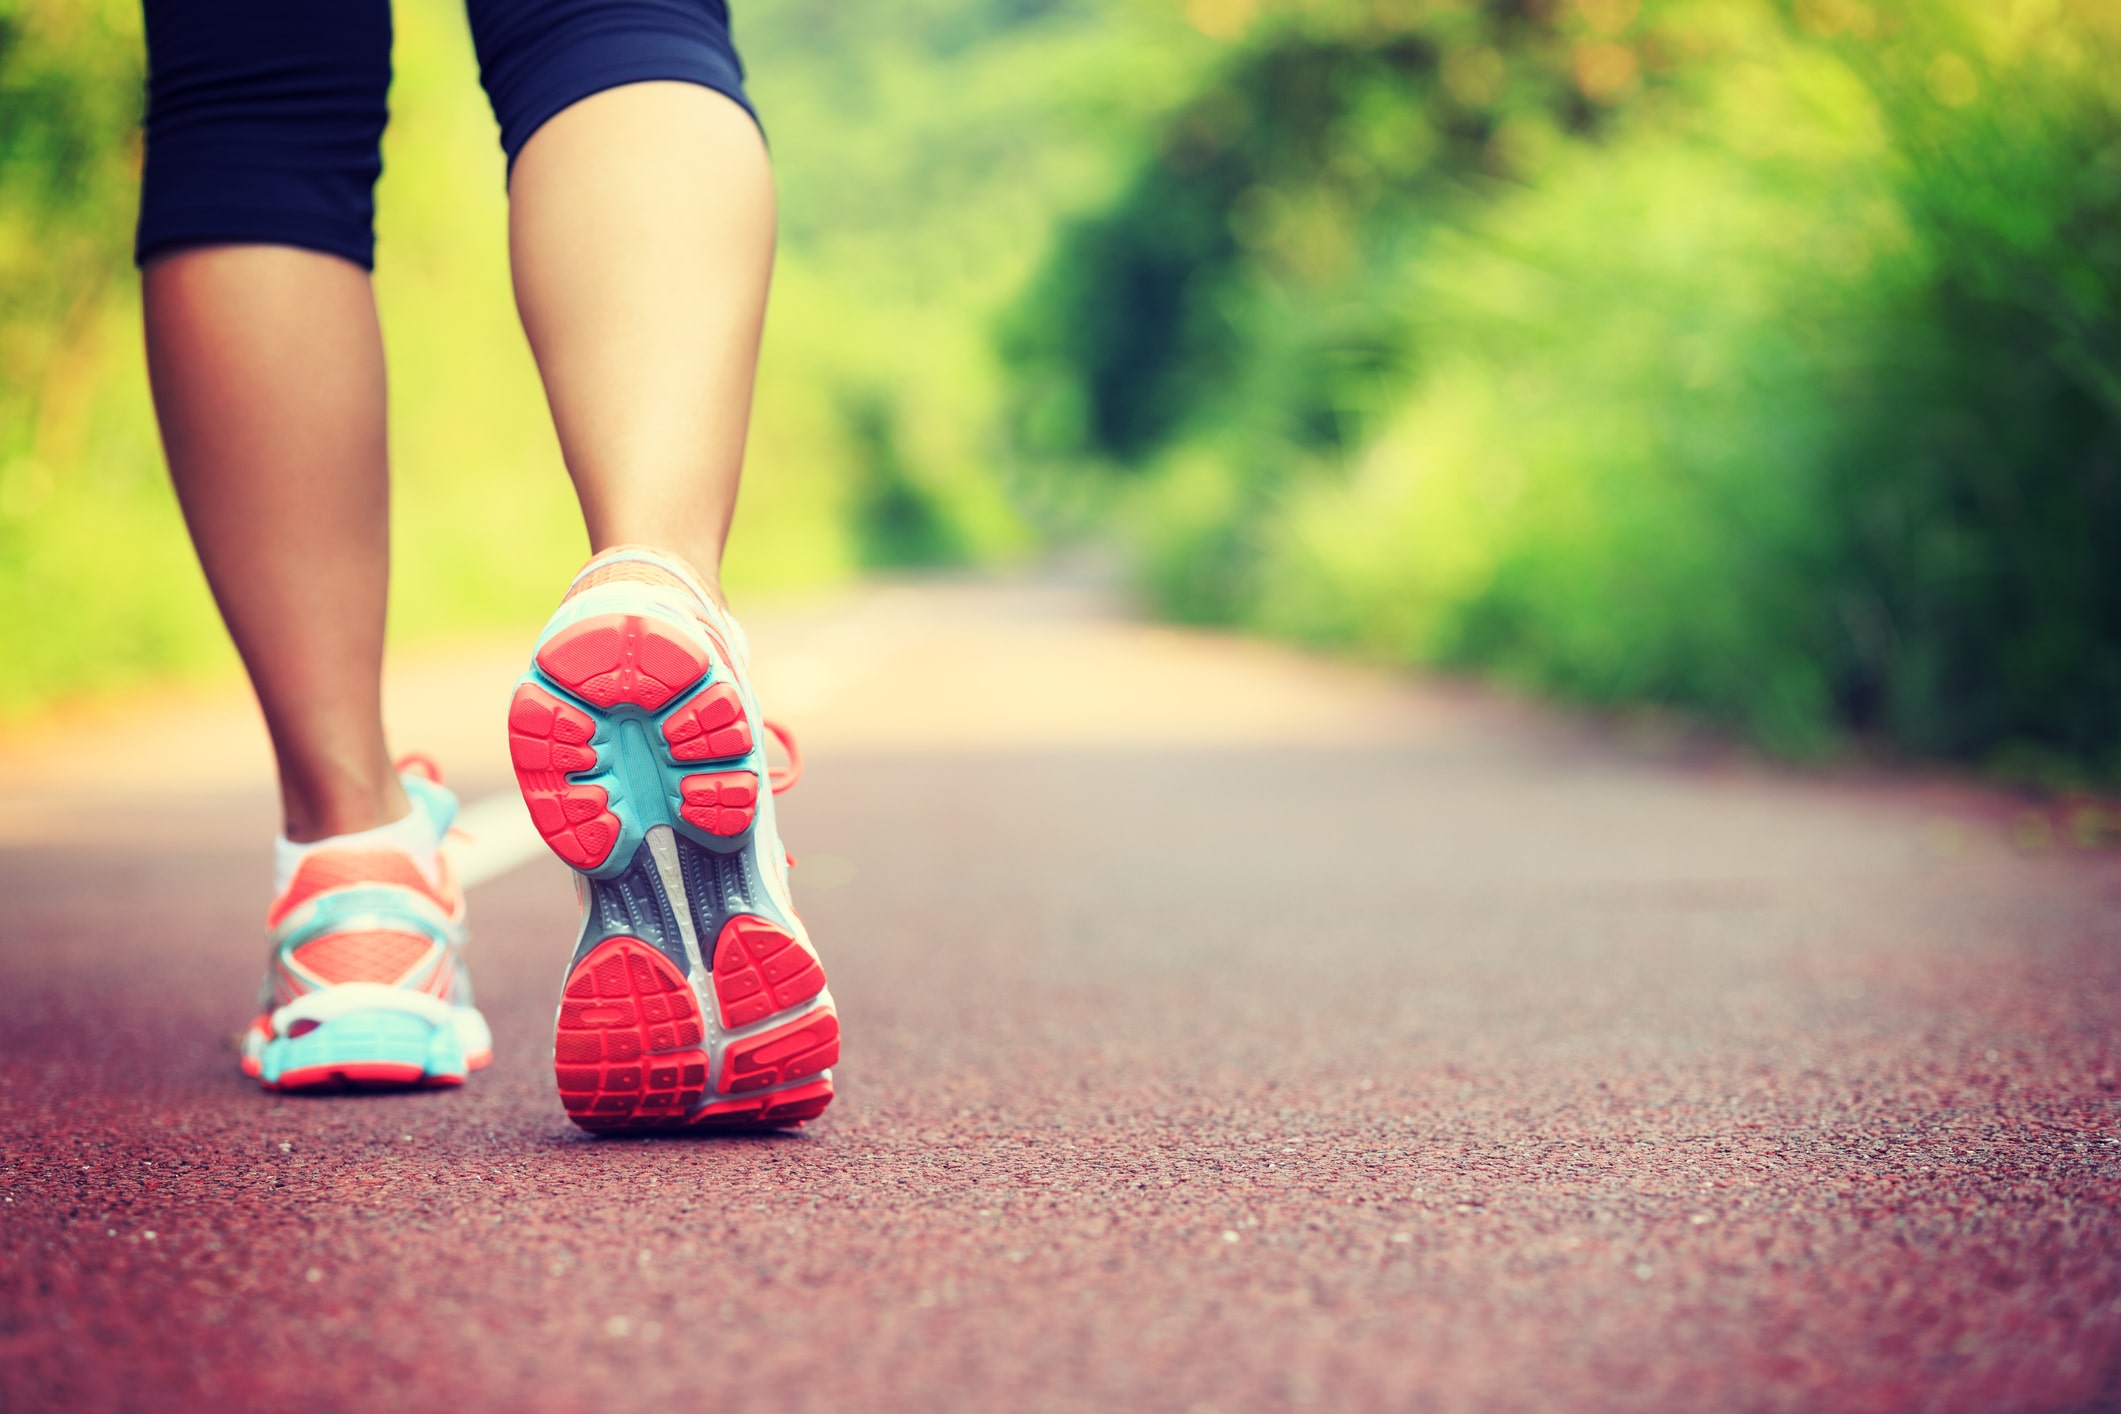 How to choose the right athletic shoes for your workout